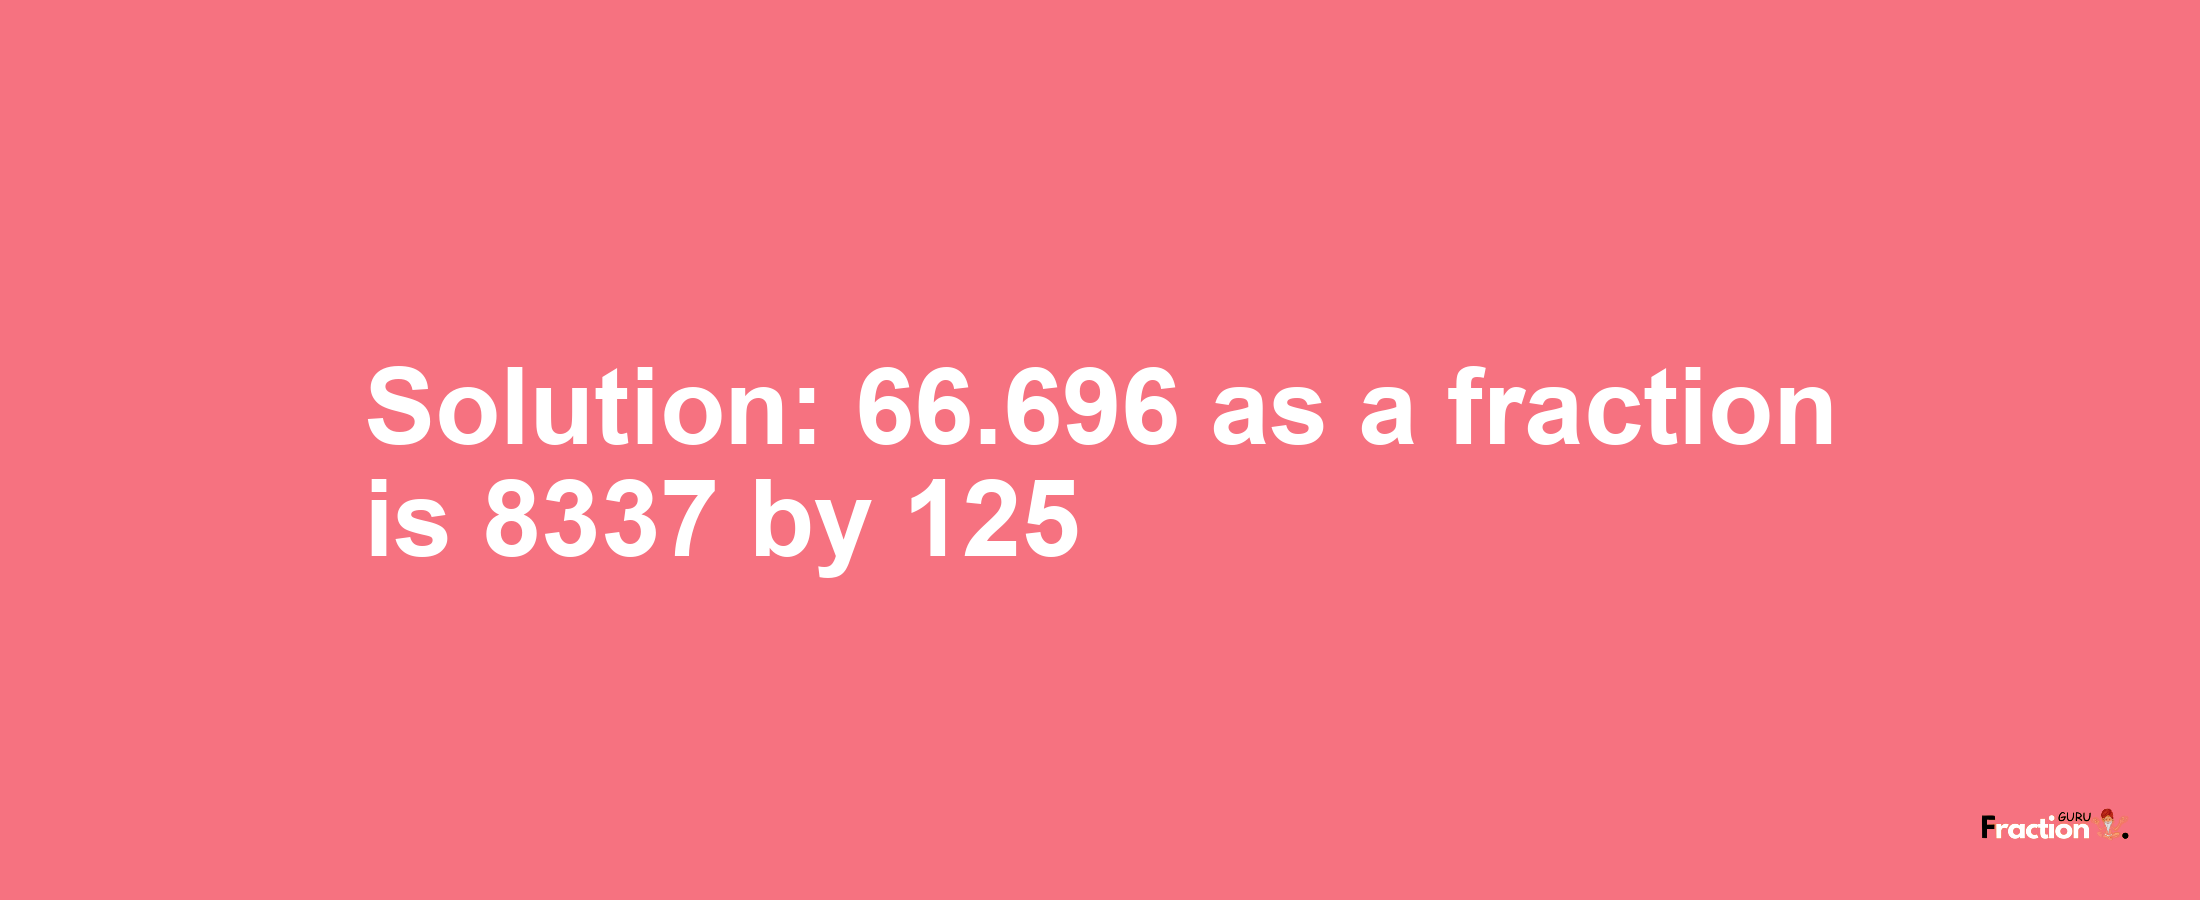 Solution:66.696 as a fraction is 8337/125